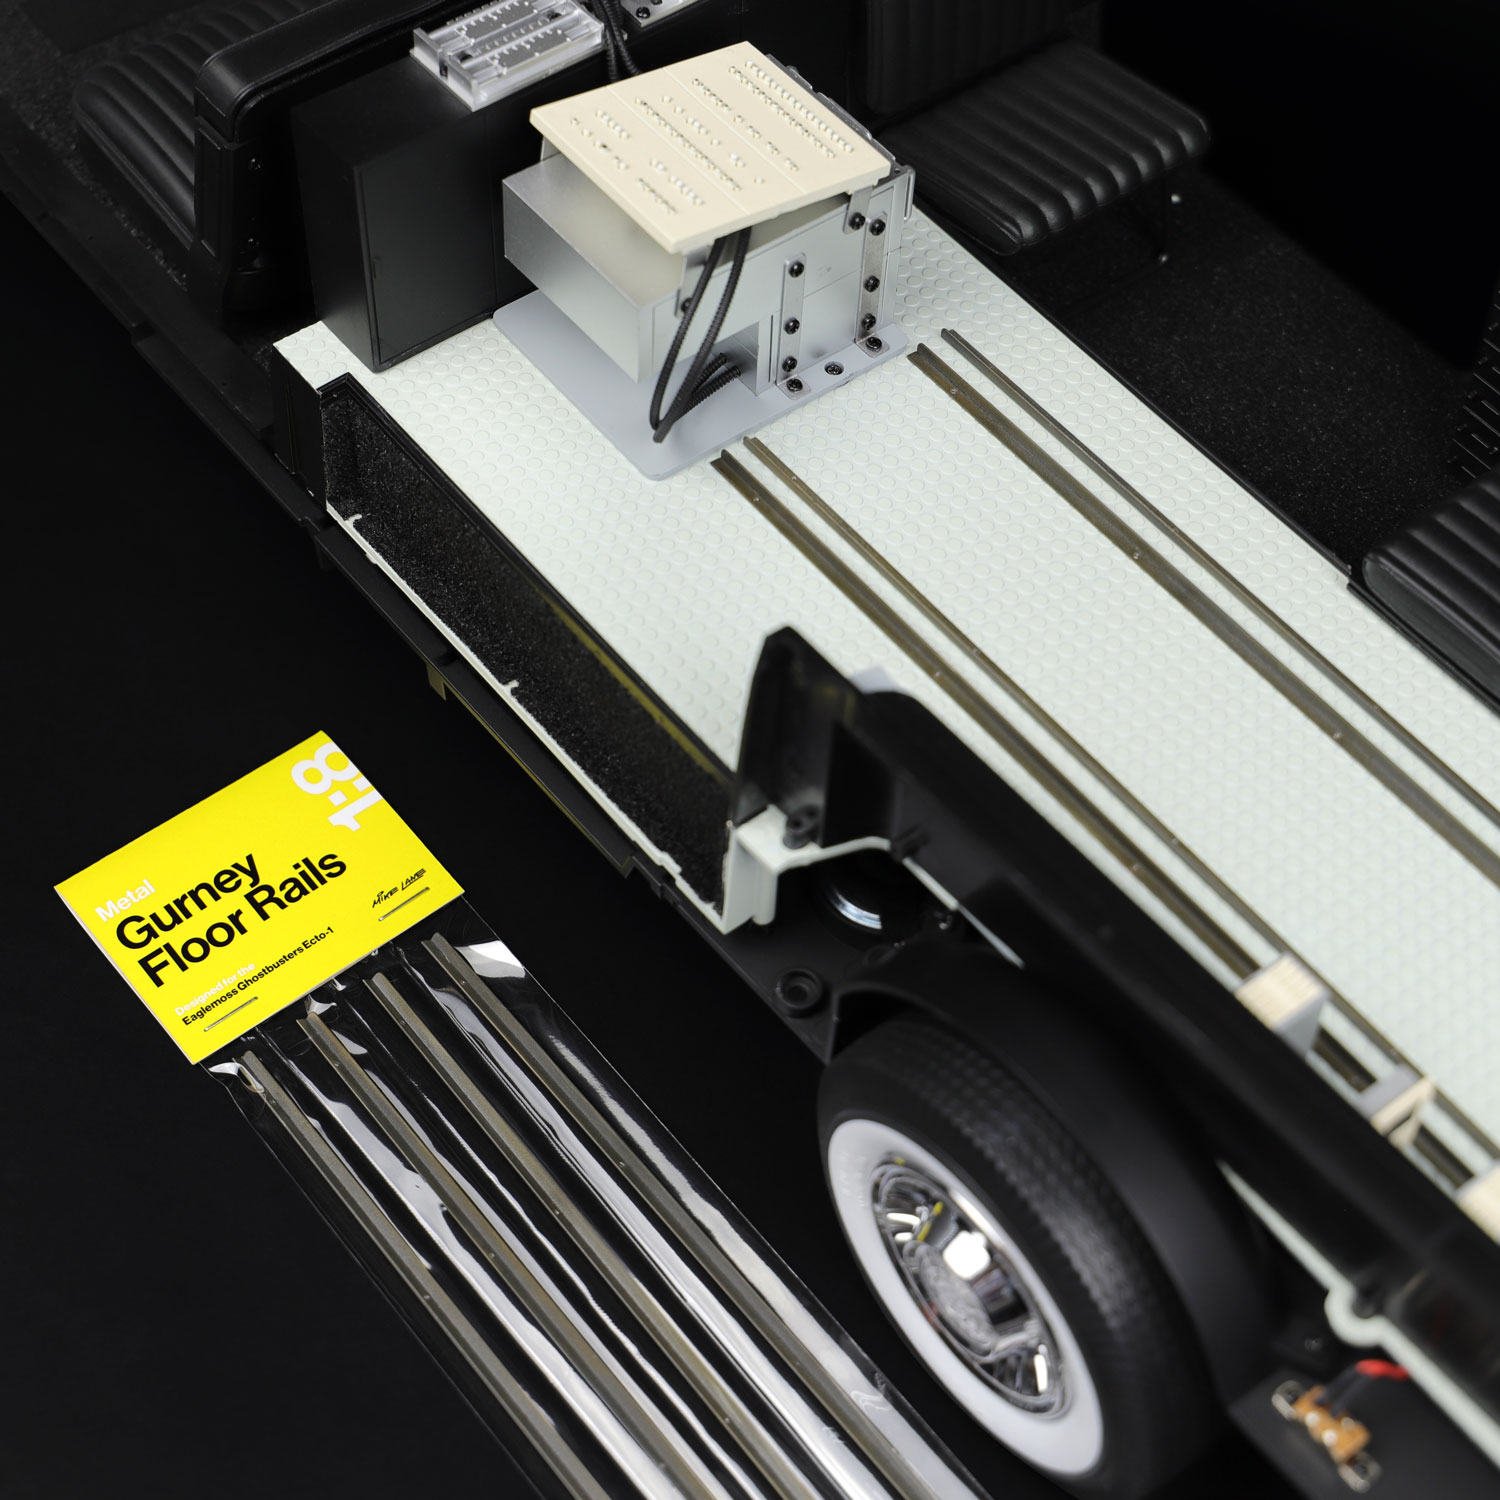 Metal Gurney Floor Rails mod packaged and shown on model